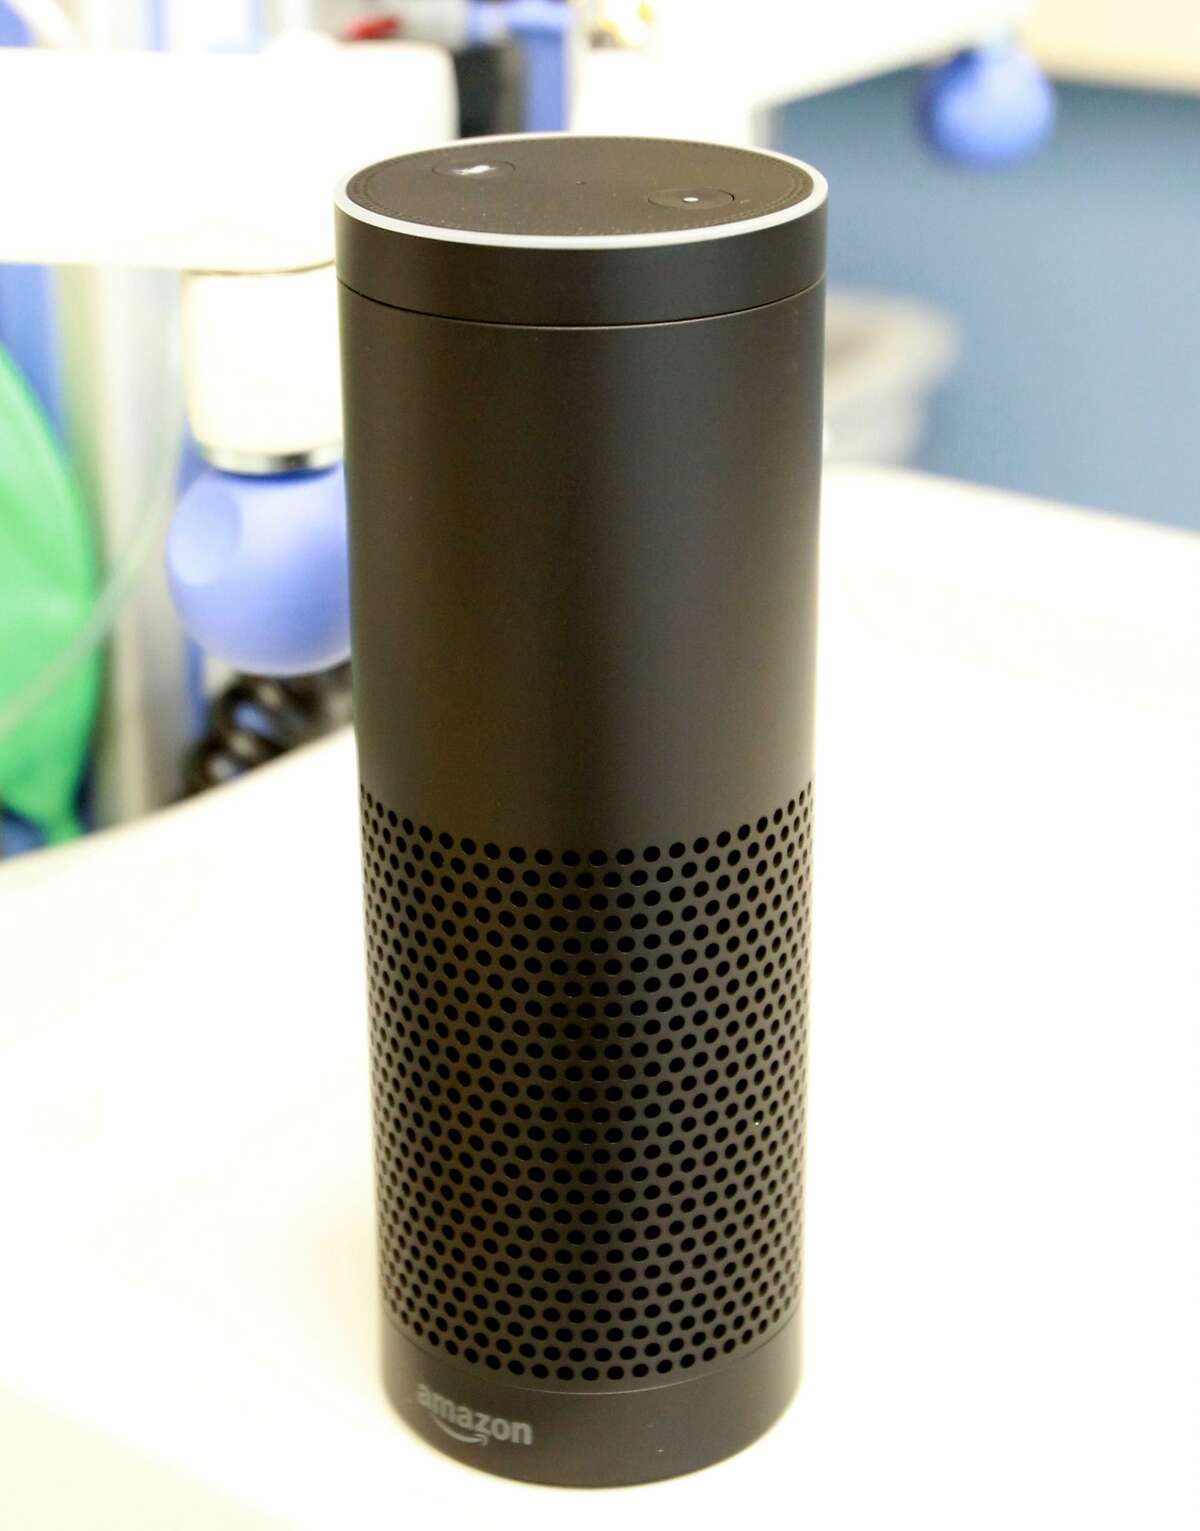 An Amazon Echo that used Amazon's Alexa voice recognition technology.